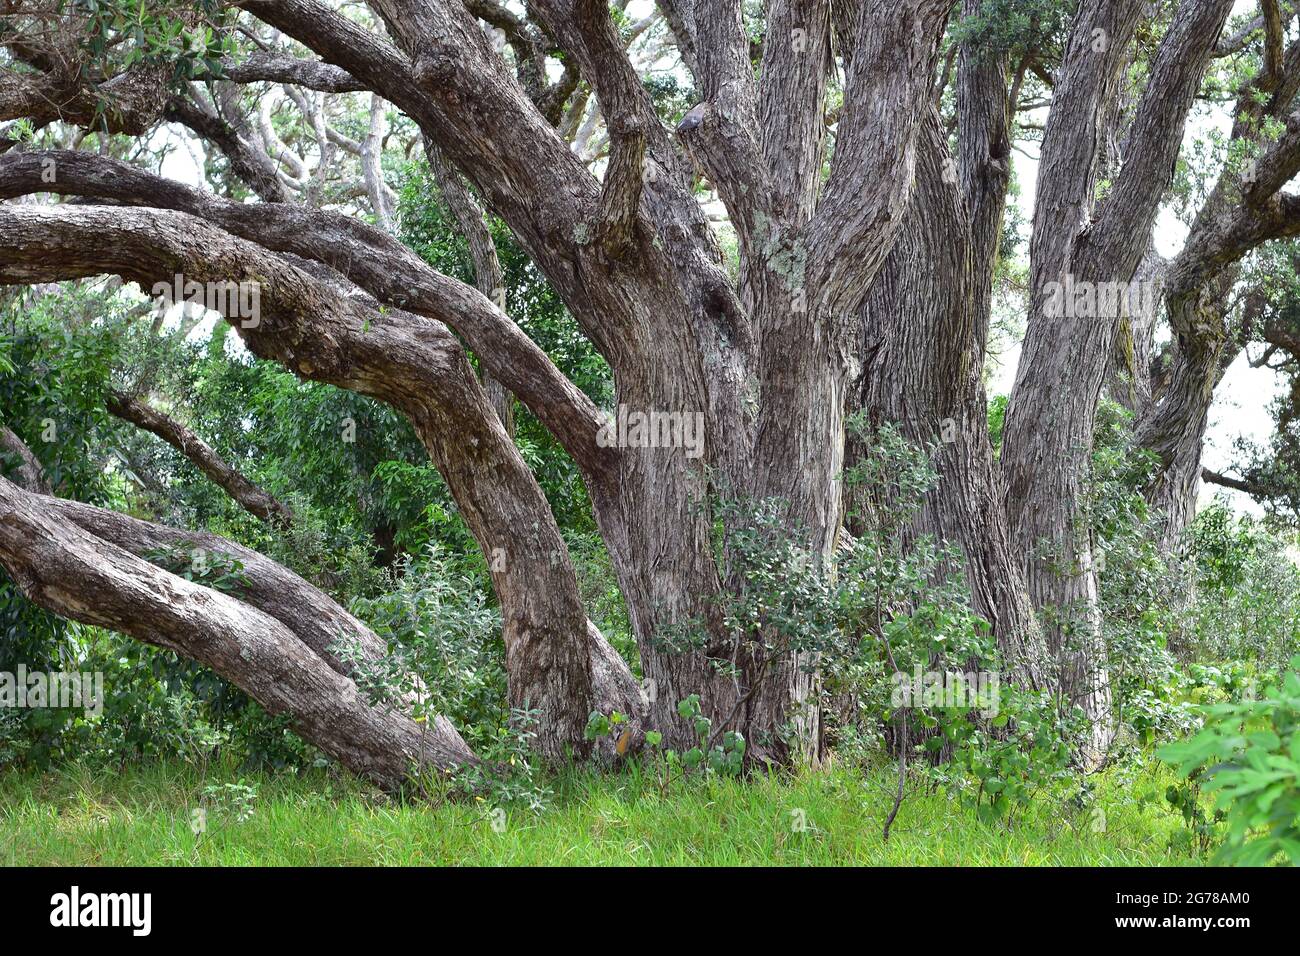 Strong curved trunks of native Pohutukawa trees growing from one place. Stock Photo